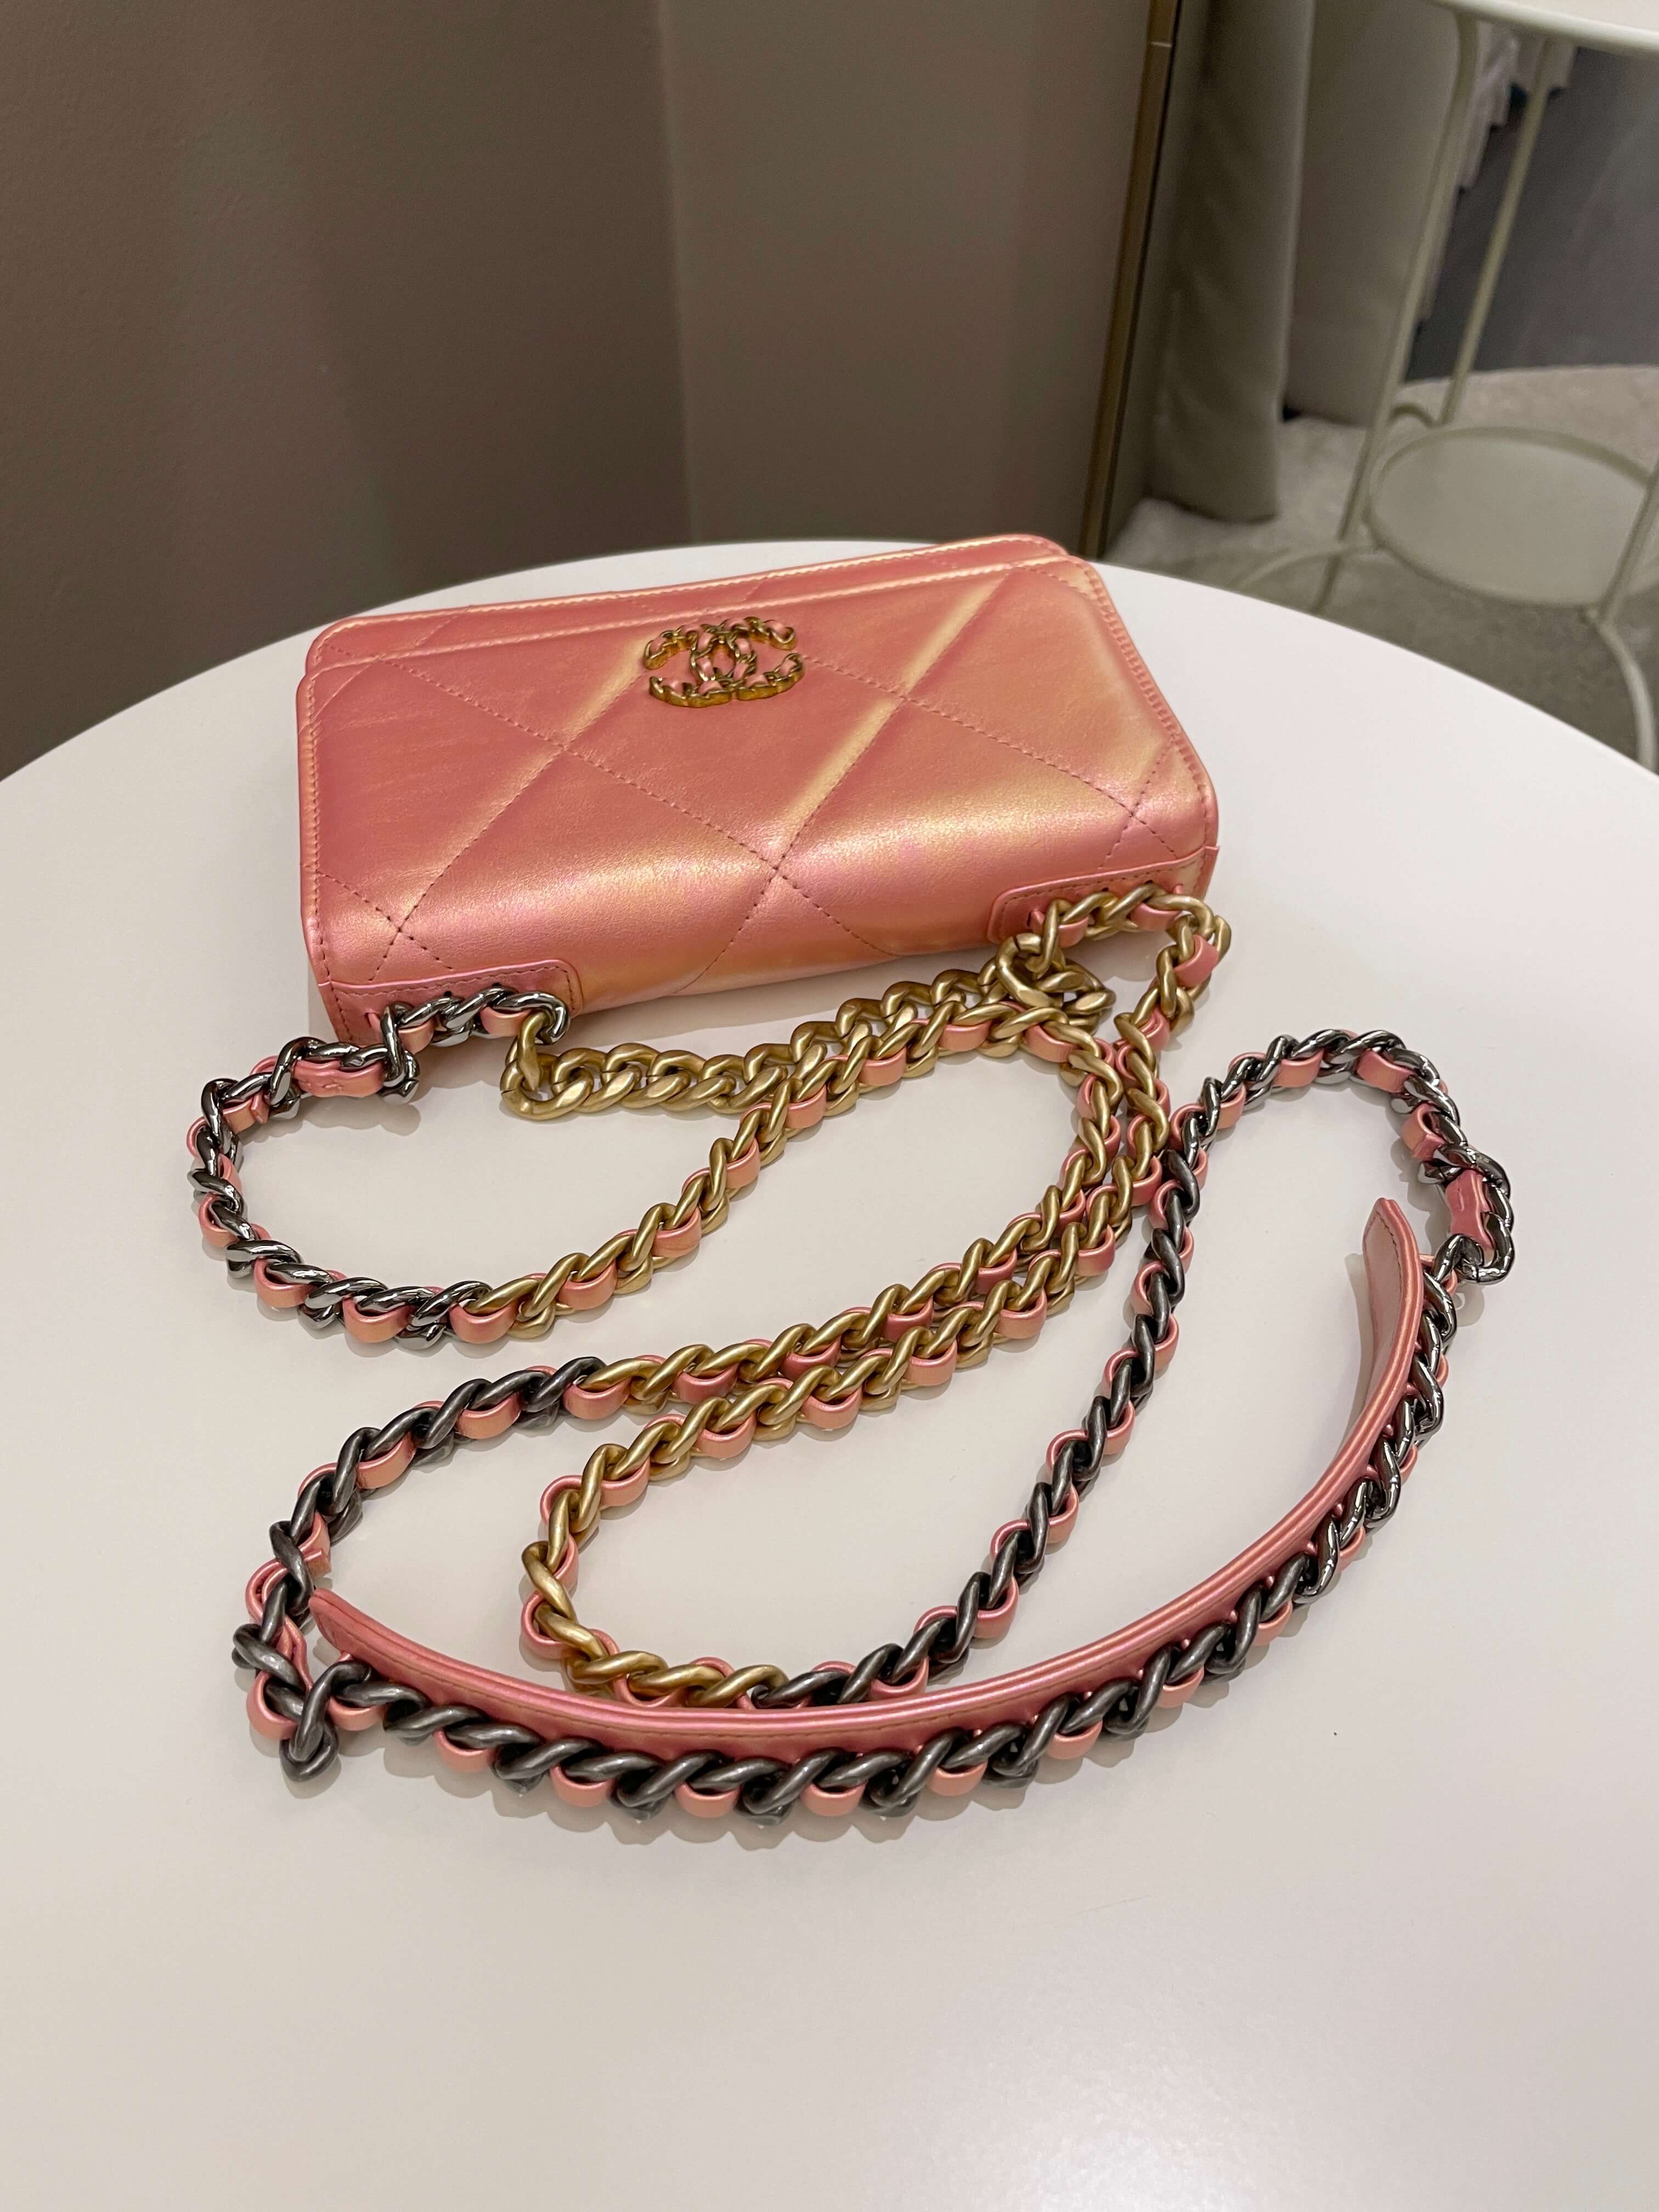 Chanel 19 Wallet On Chain Coral Iridescent